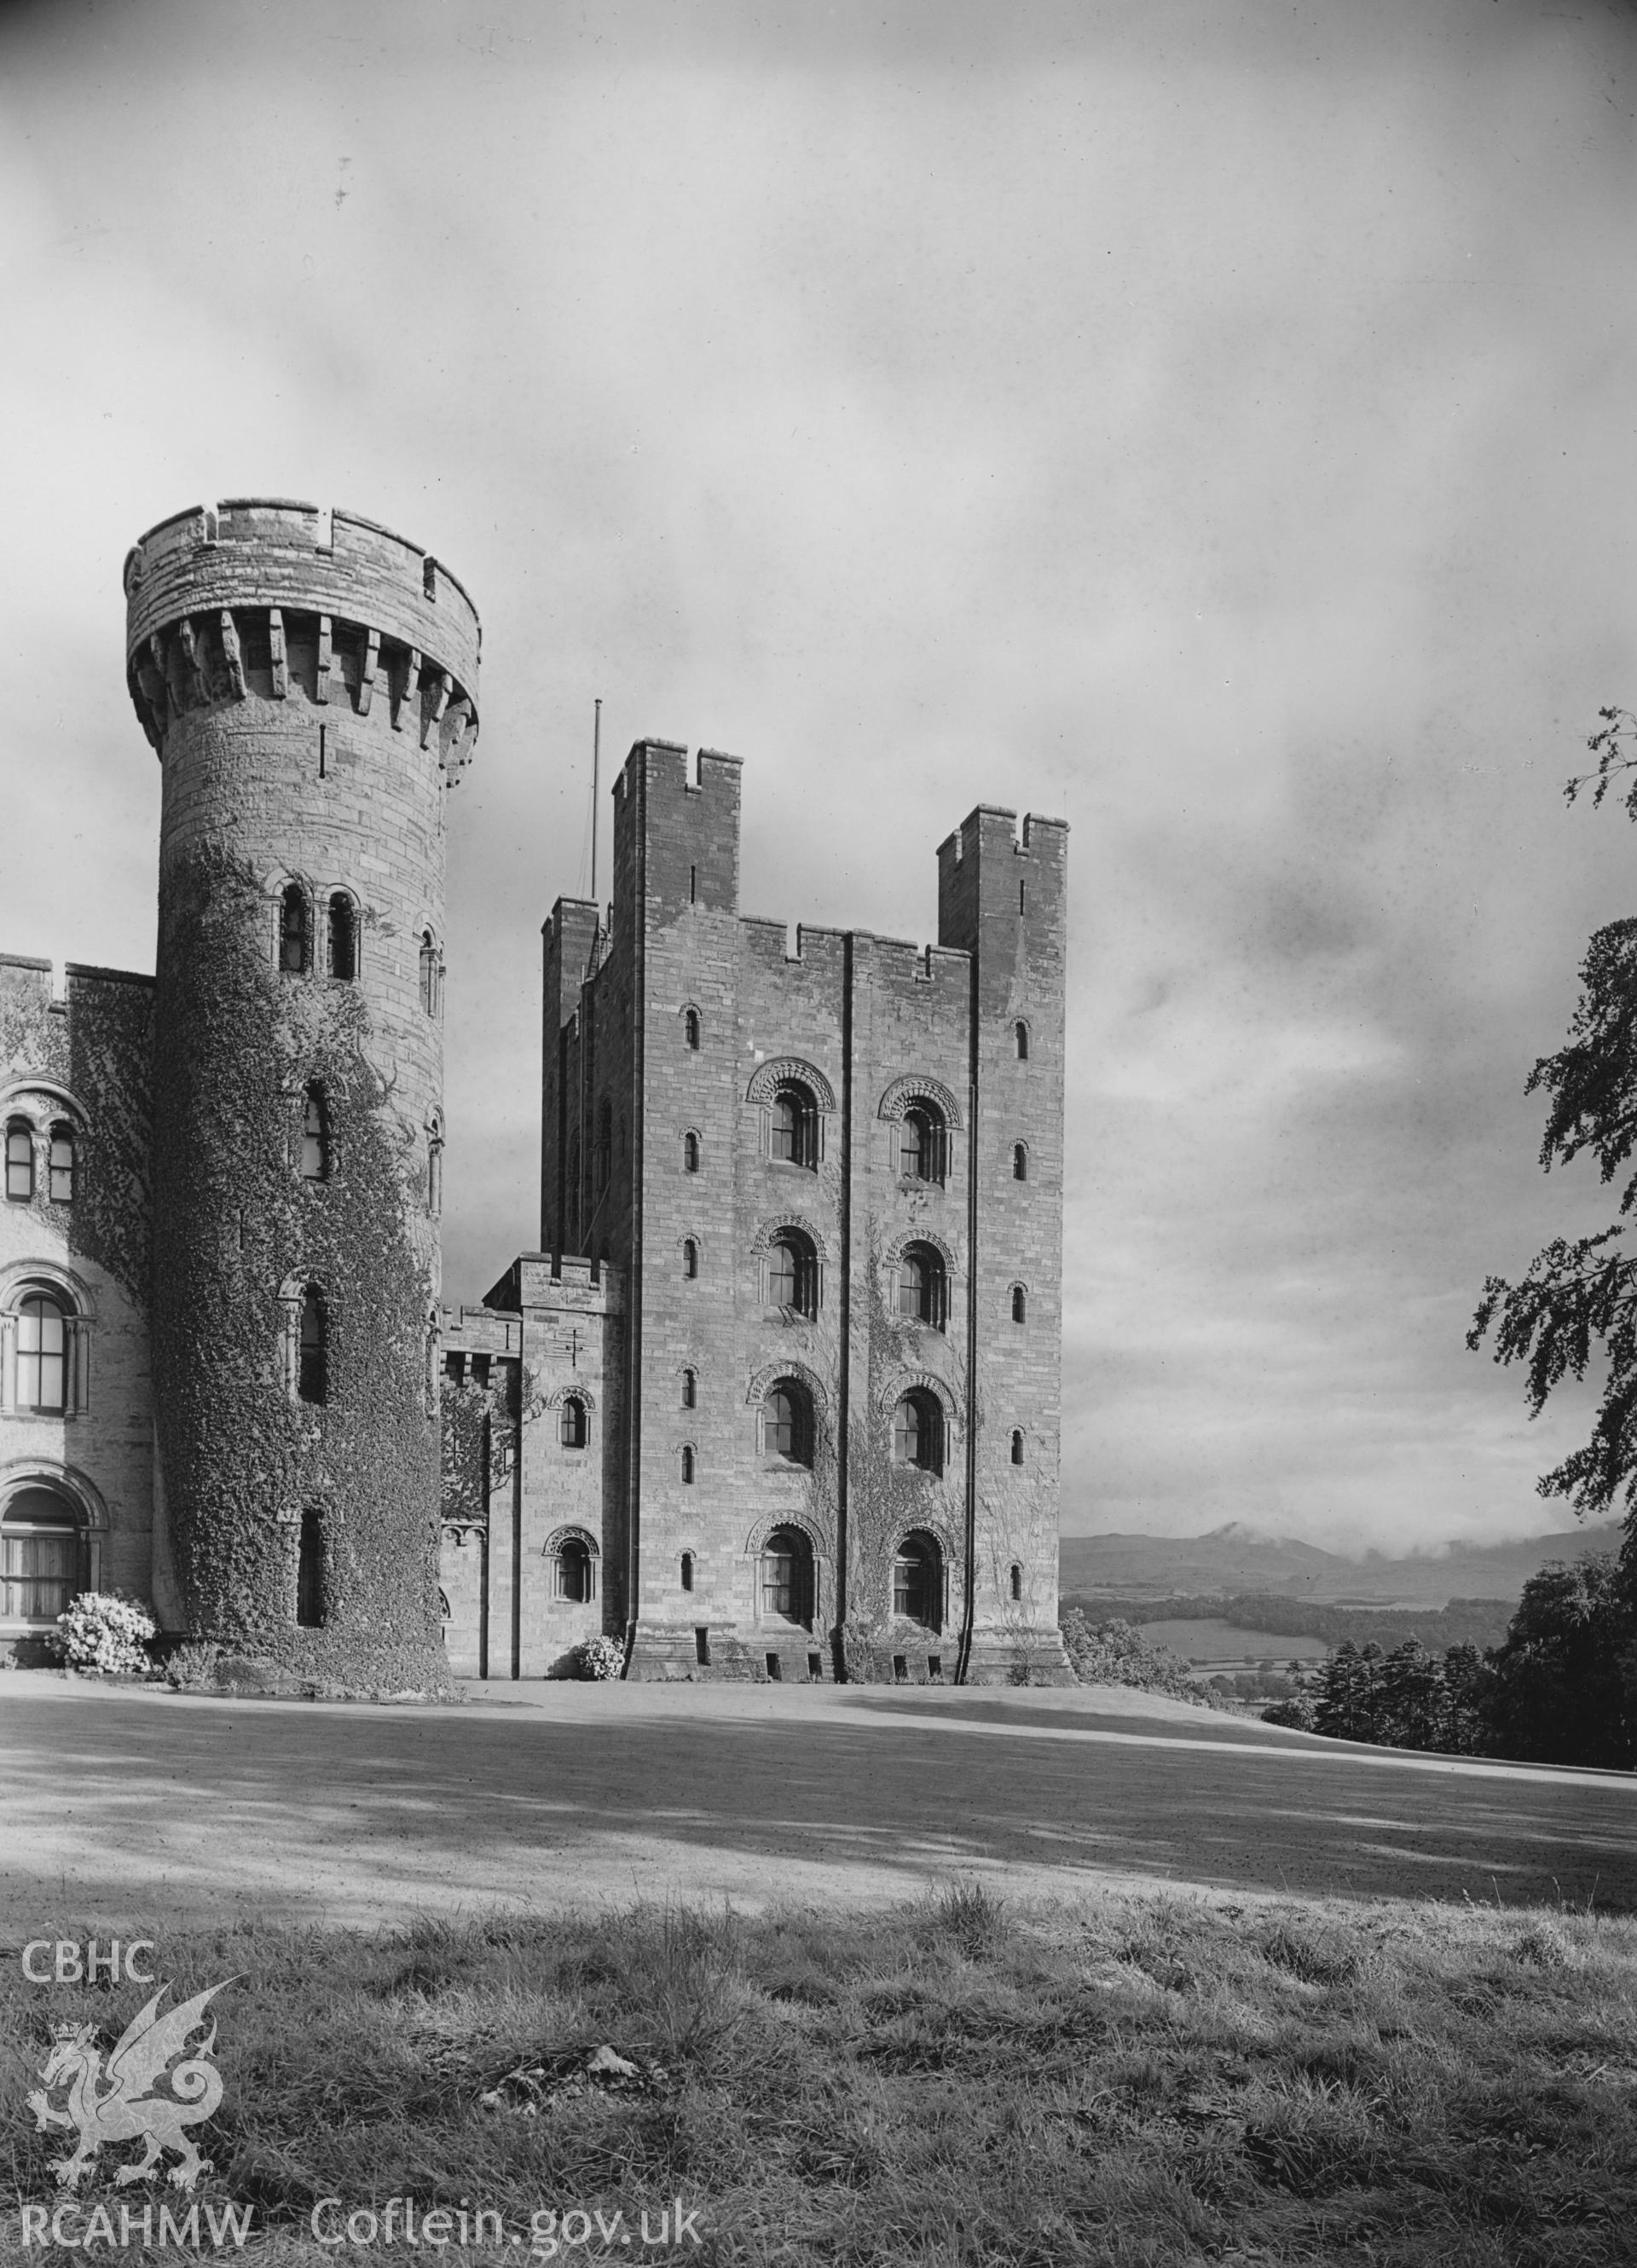 Digital copy of a 1954 photo by A.F. Kersting showing view of the keep from the northwest at Penrhyn Castle.